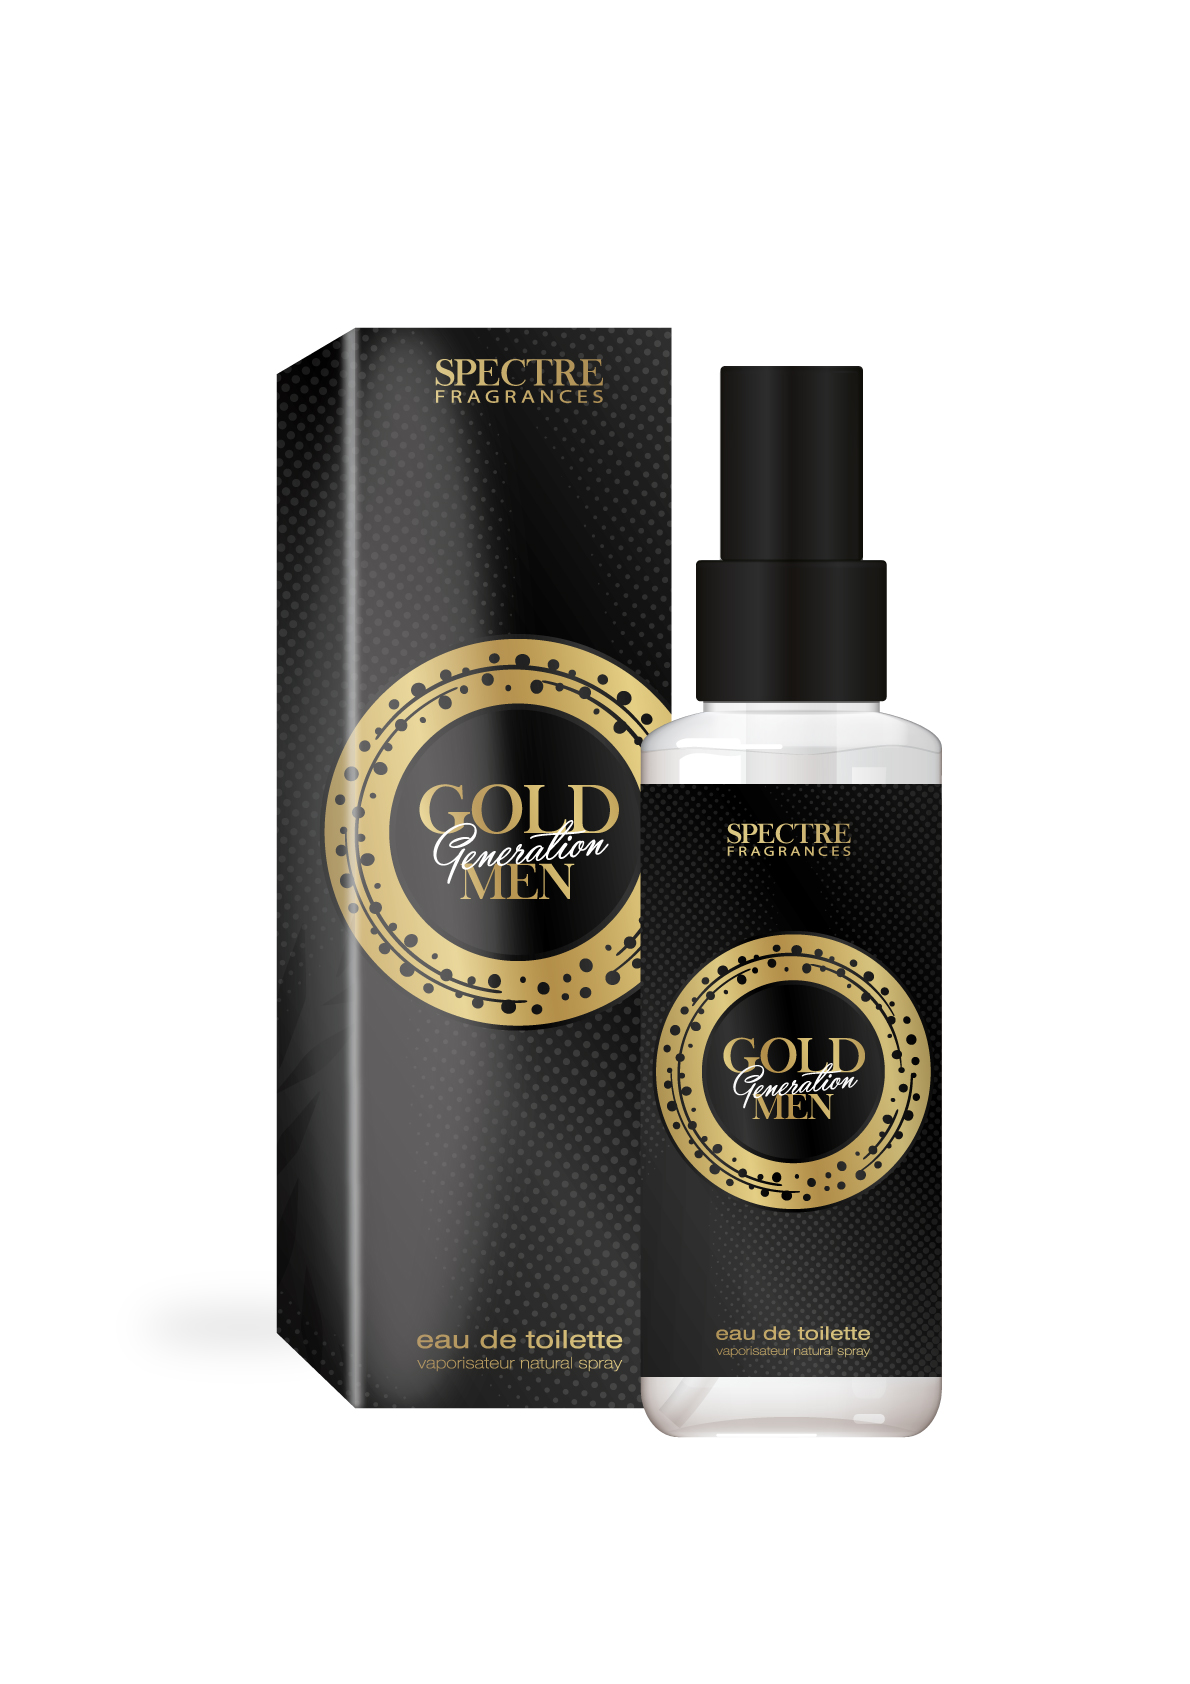 Featured image for “Gold Genration Men 24st”